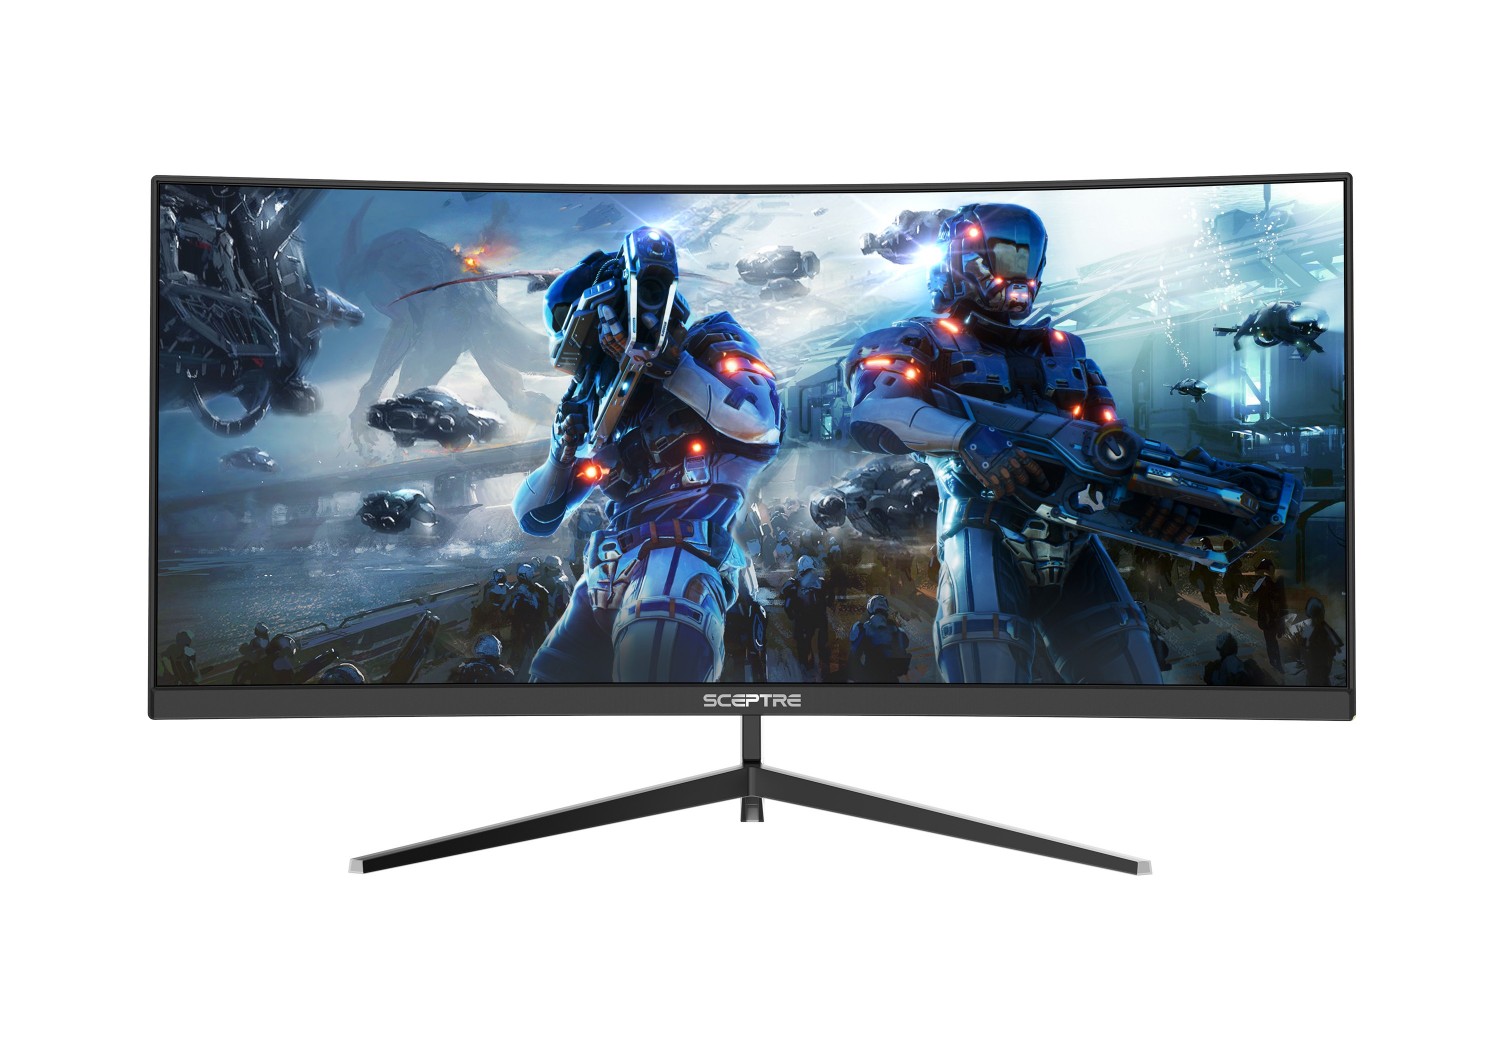 Metal Black Sceptre 30-inch Curved Gaming Monitor 21:9 2560x1080 Ultra Wide Ultra Slim HDMI DisplayPort up to 200Hz Build-in Speakers C305B-200UN